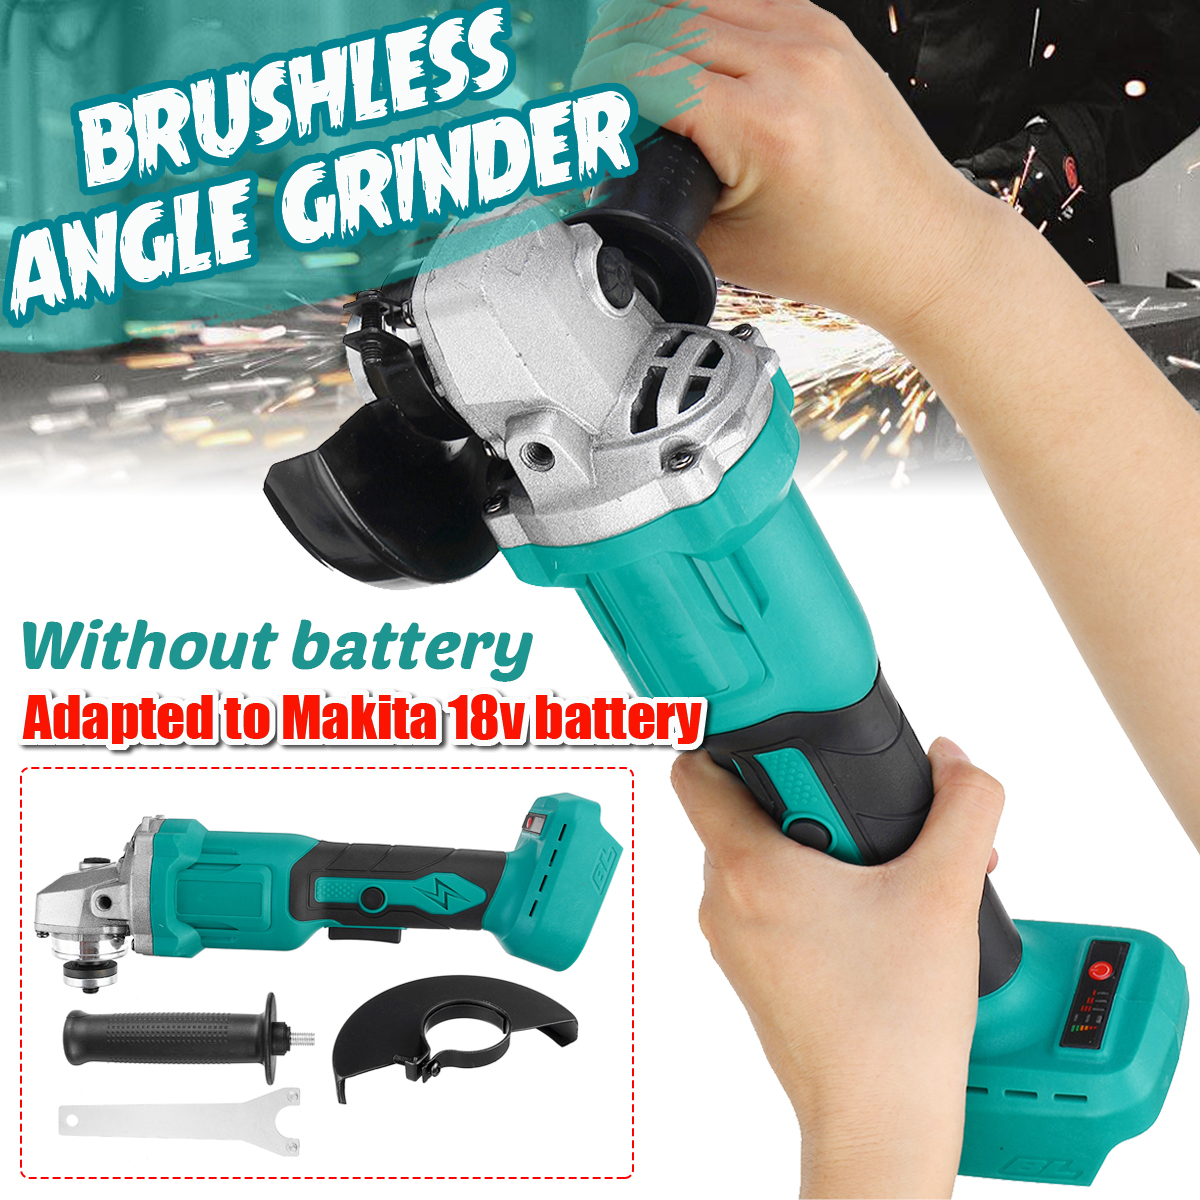 100mm-Brushless-Electric-Angle-Grinder-Grinding-Machine-Cordless-DIY-Woodworking-Power-Tool-1764625-2